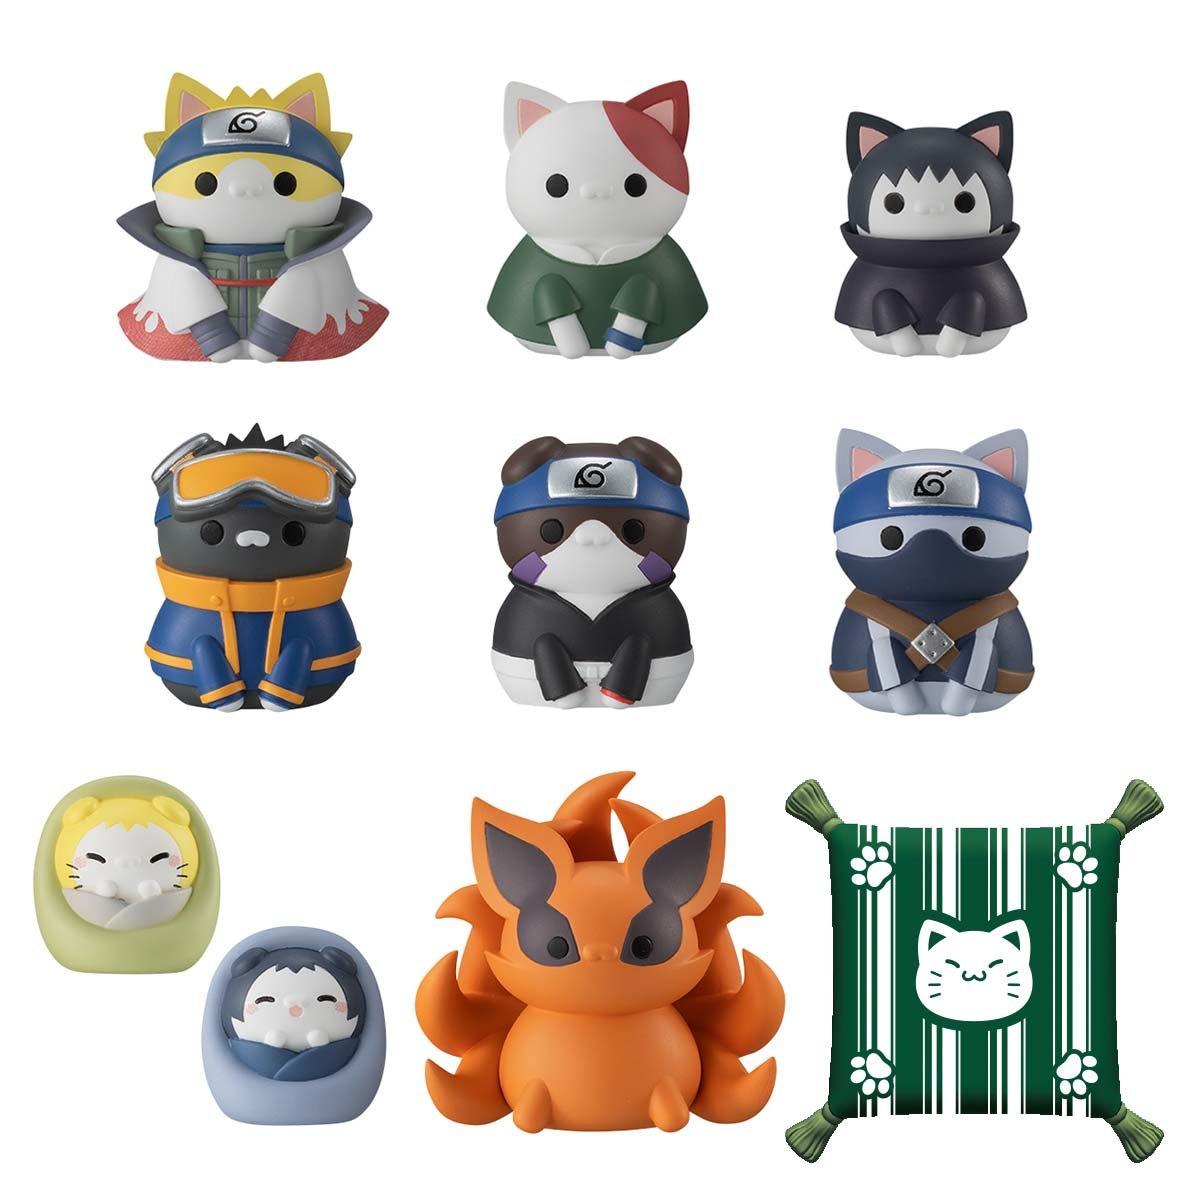 MegaHouse Mega Cat Project Nyaruto! Naruto Shippuden Once Upon A Time in Konoha Set of 8 1.1-in Figures with Bonus Mini Cushion